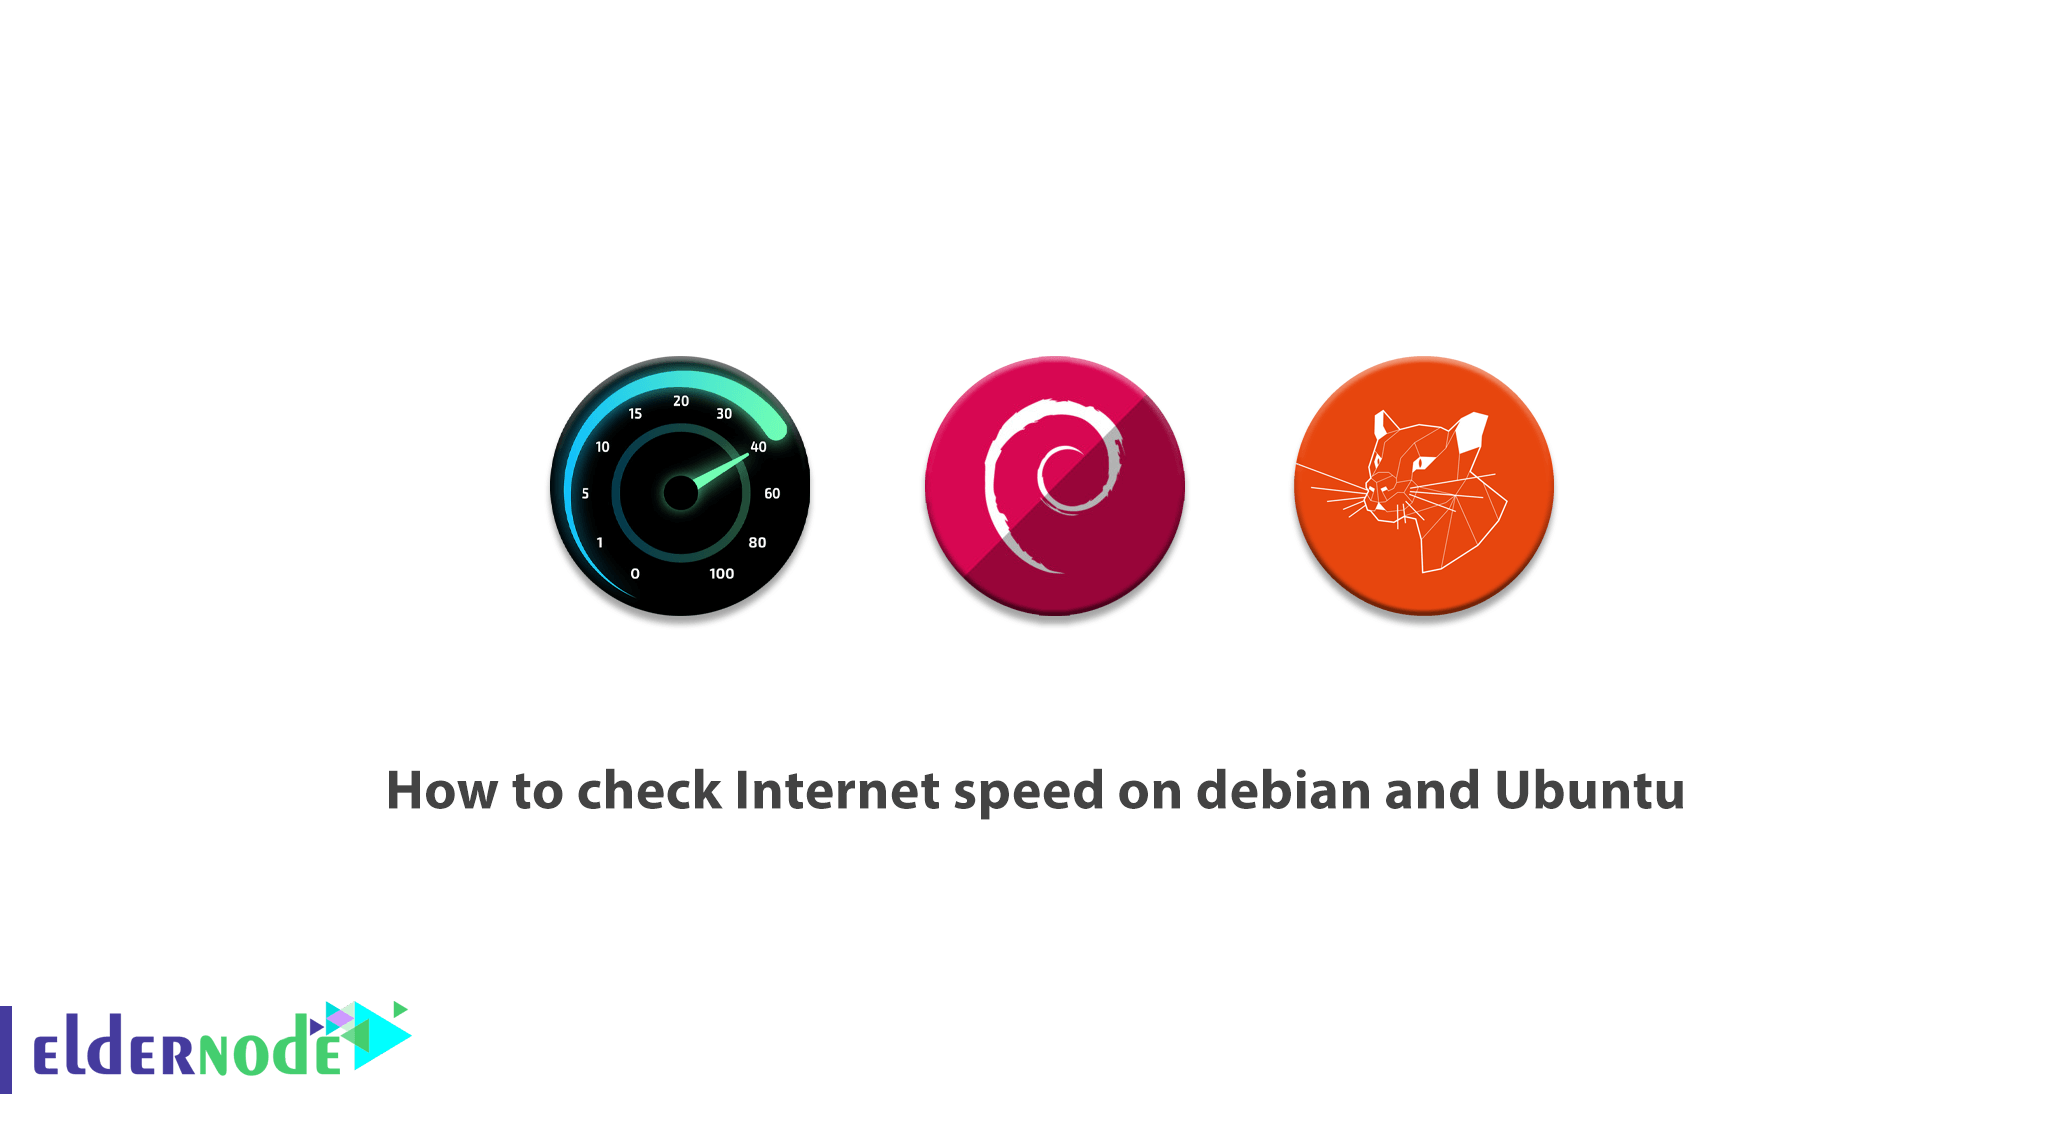 How to check Internet speed on debian and Ubuntu